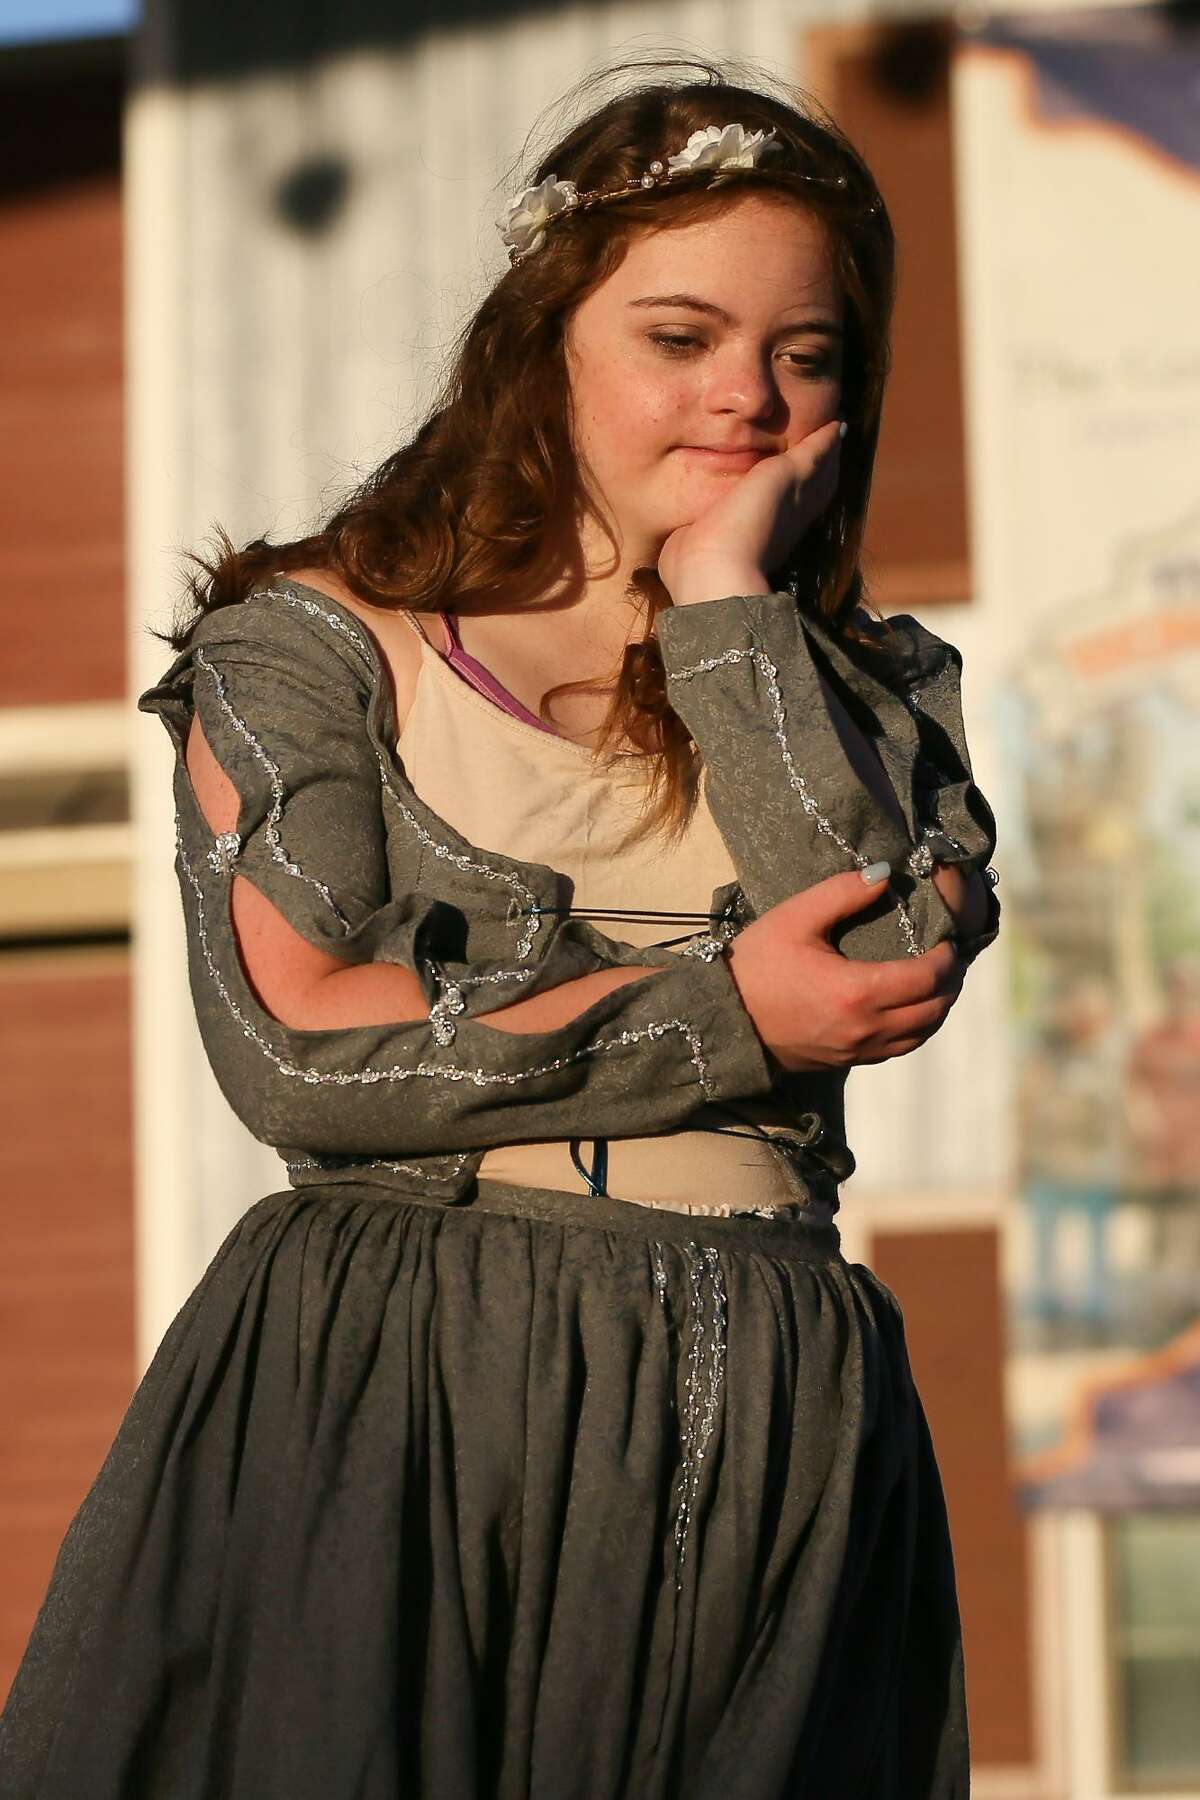 Leah Meyer, 18, takes part in a dress rehearsal for “Scenes, Sonnets and Soliloquies: Vol 1,” which includes snippets from several of Shakespeare’s plays. Meyer plays Juliet in the balcony scene from “Romeo and Juliet.”